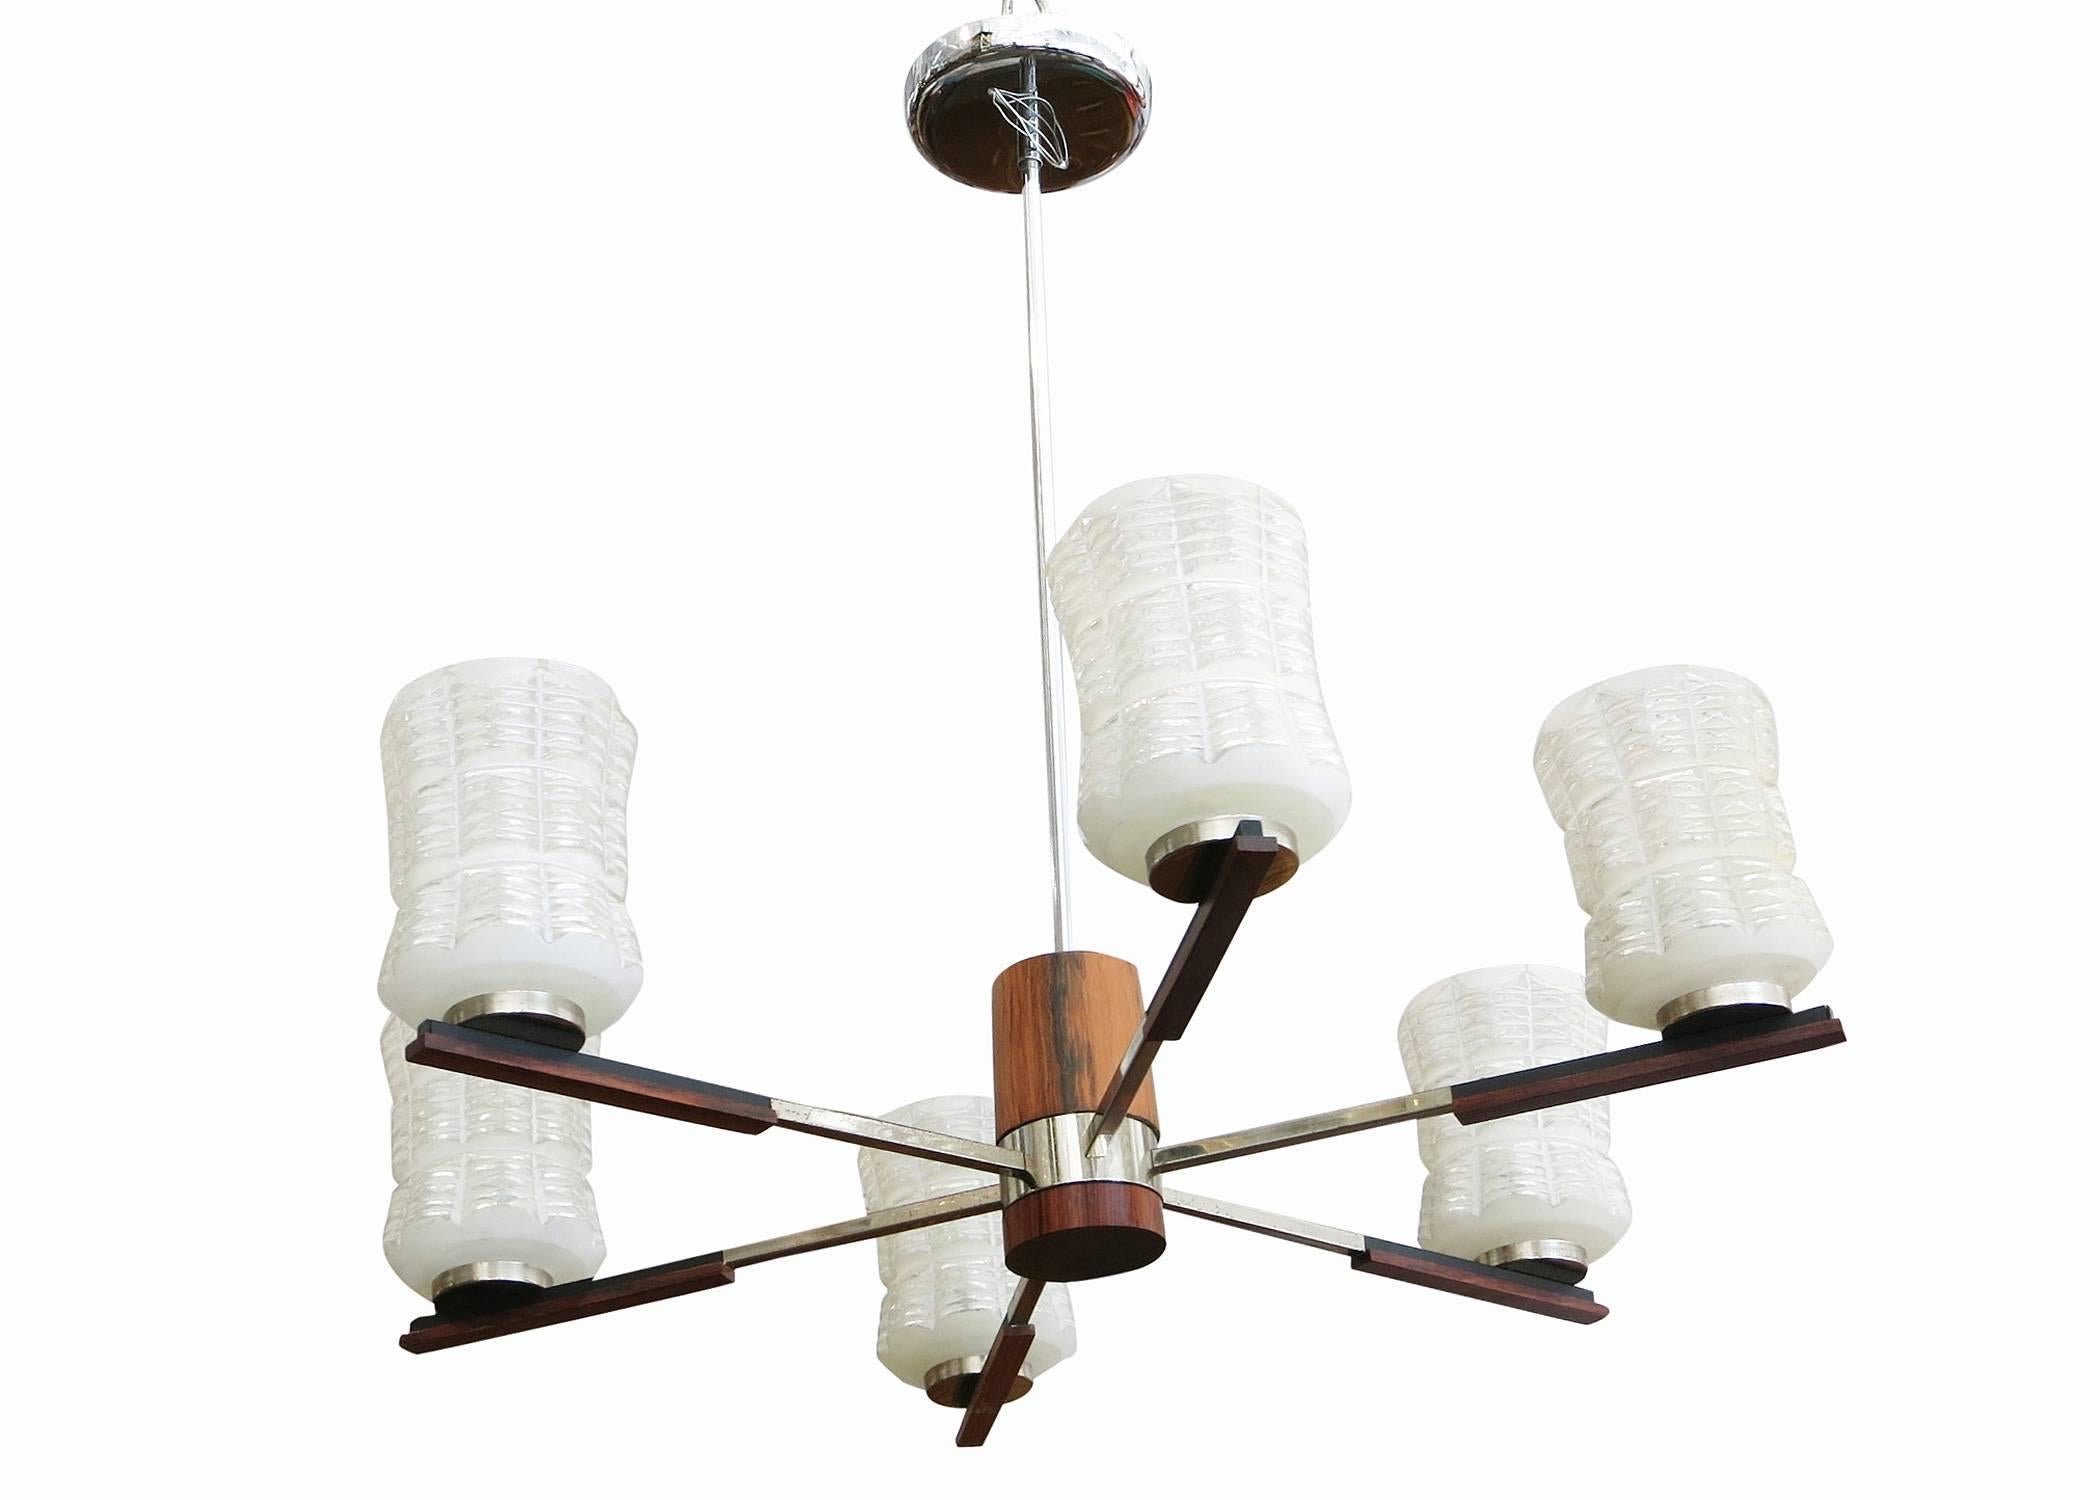 Italian Mid-century Sputnik chandelier with chrome arms and rosewood accents, circa 1960. Each arm holds a frosted glass shade textured with clear cut-outs.